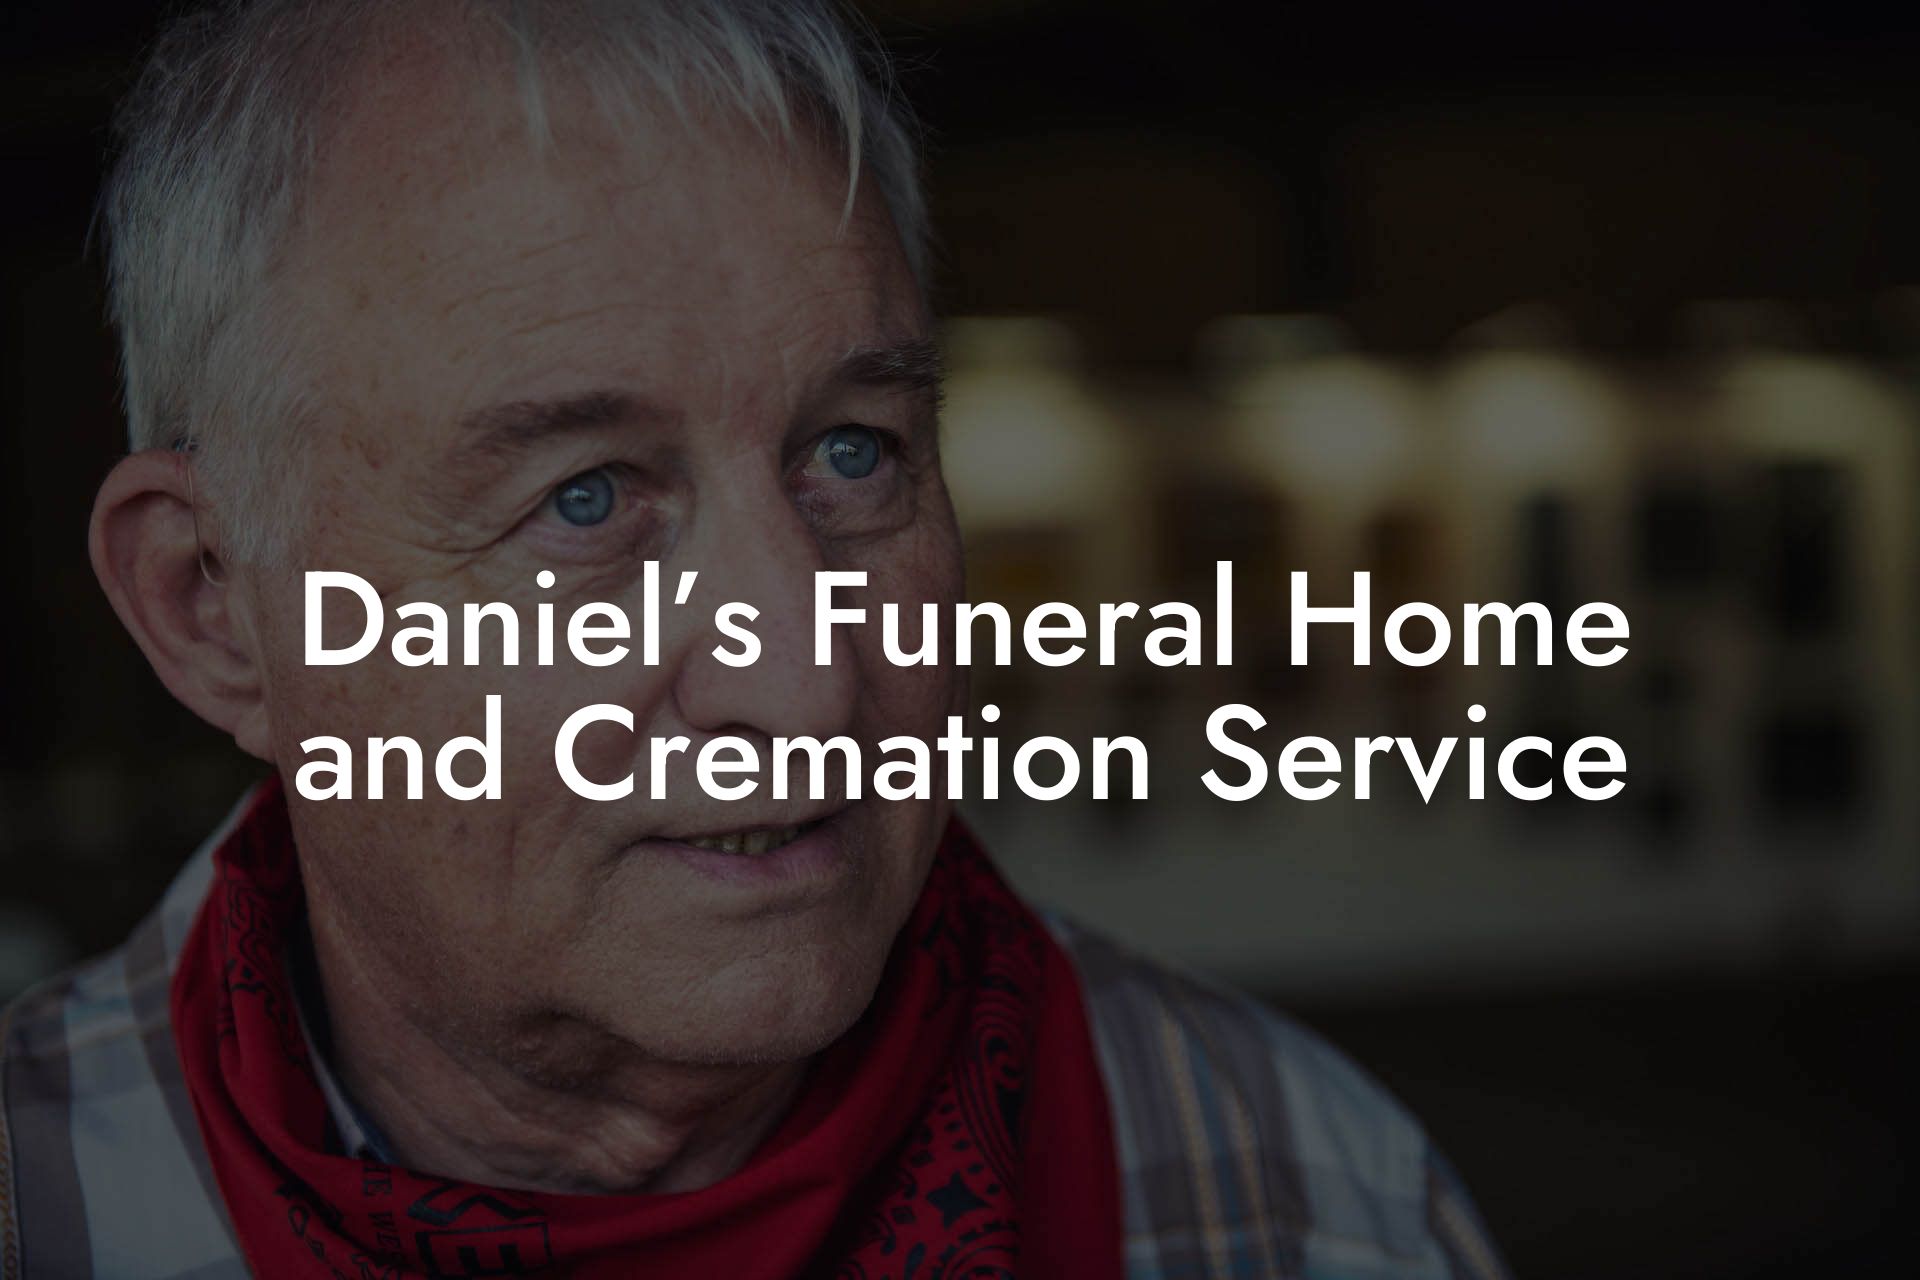 Daniel’s Funeral Home and Cremation Service